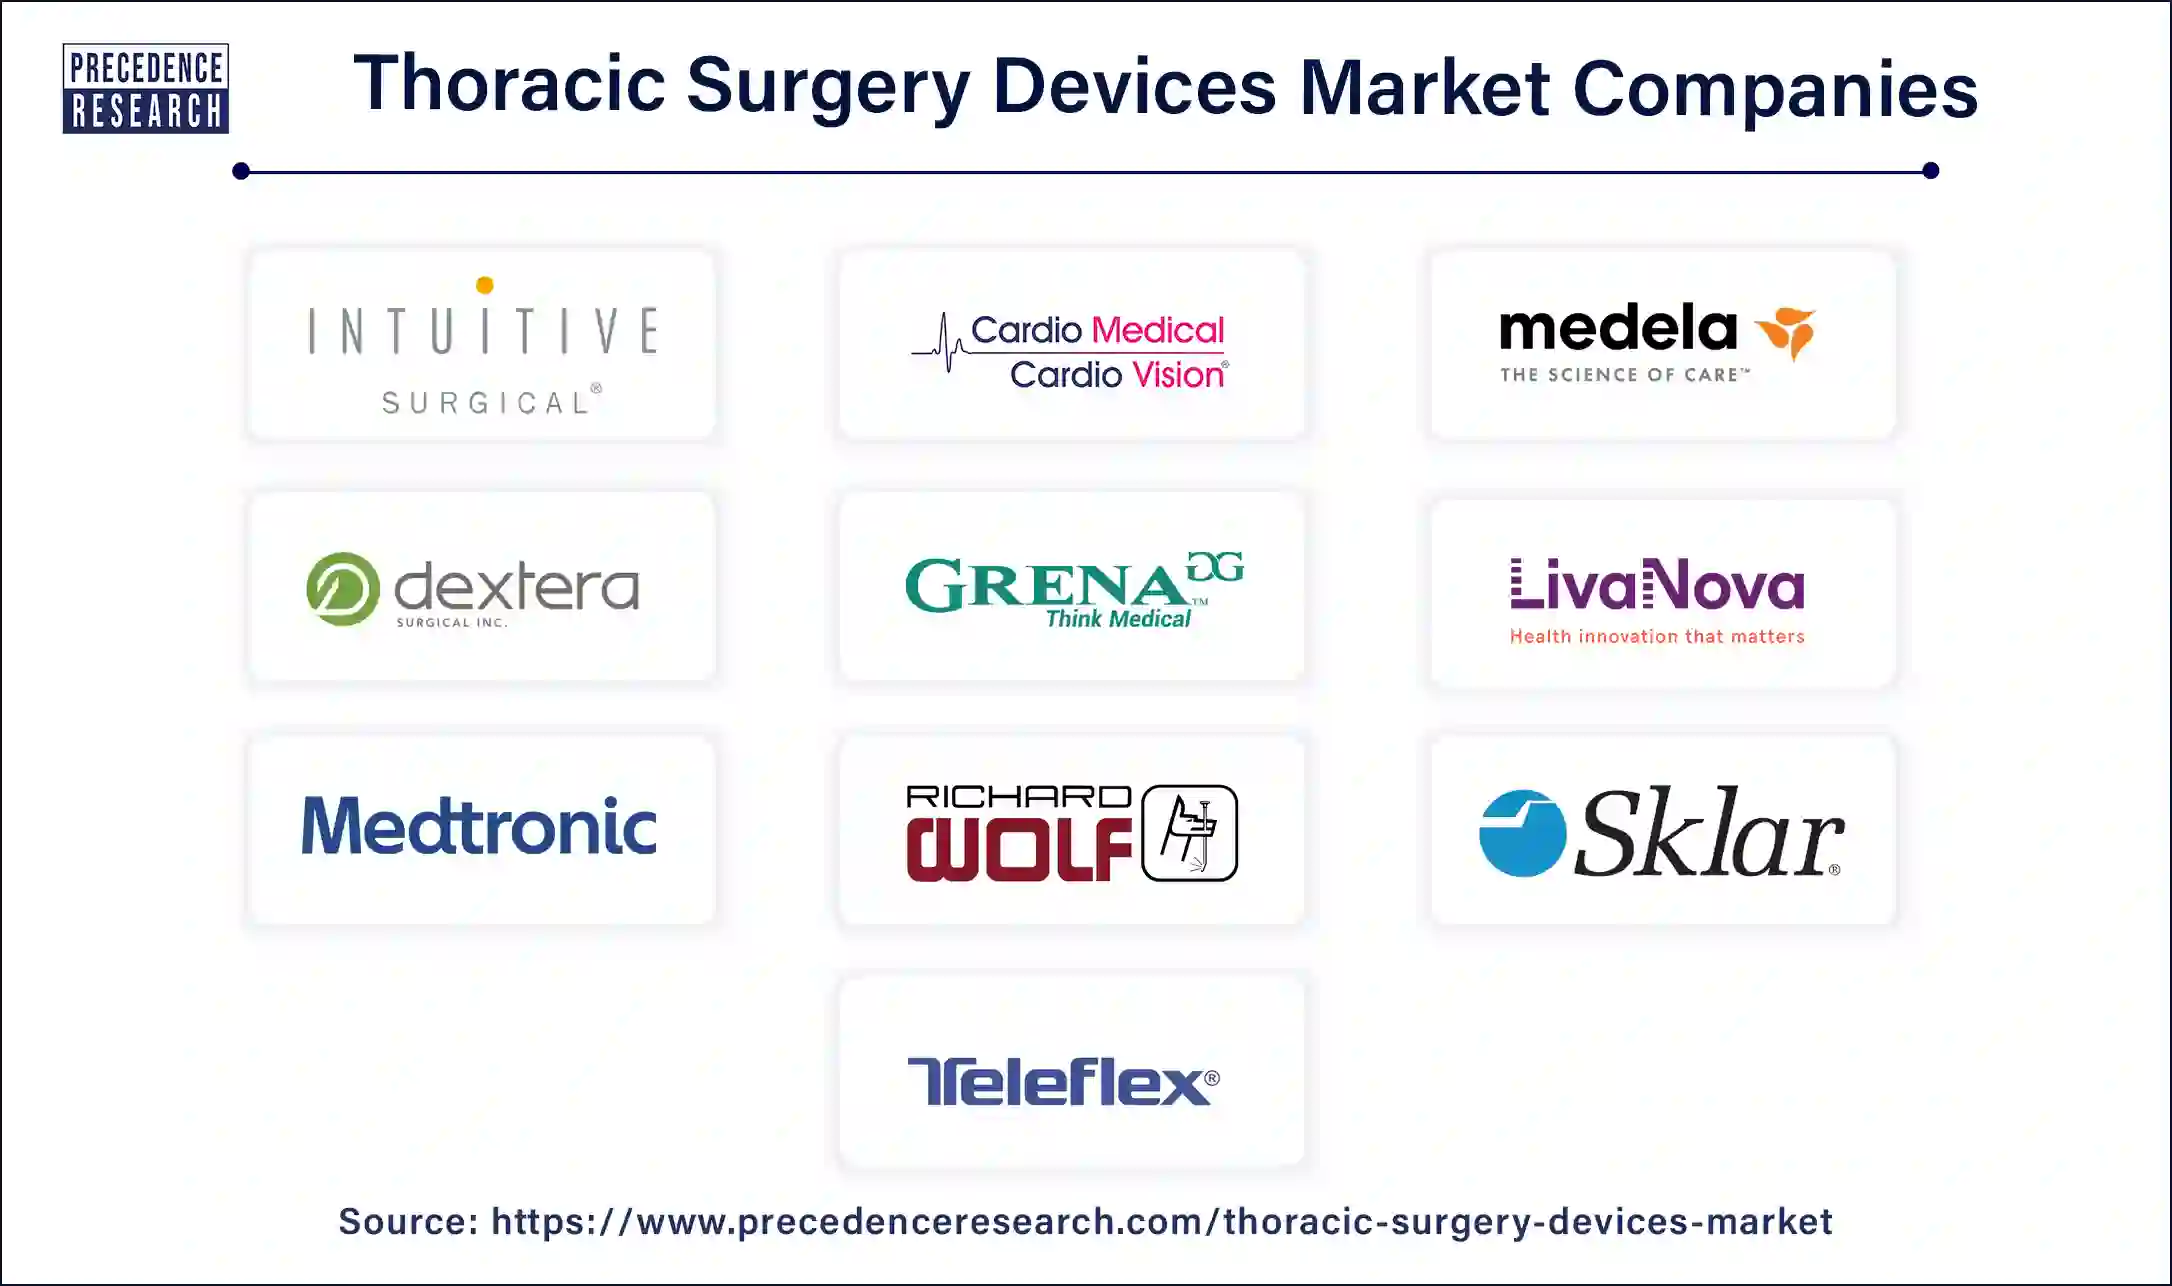 Thoracic Surgery Devices Comapnies